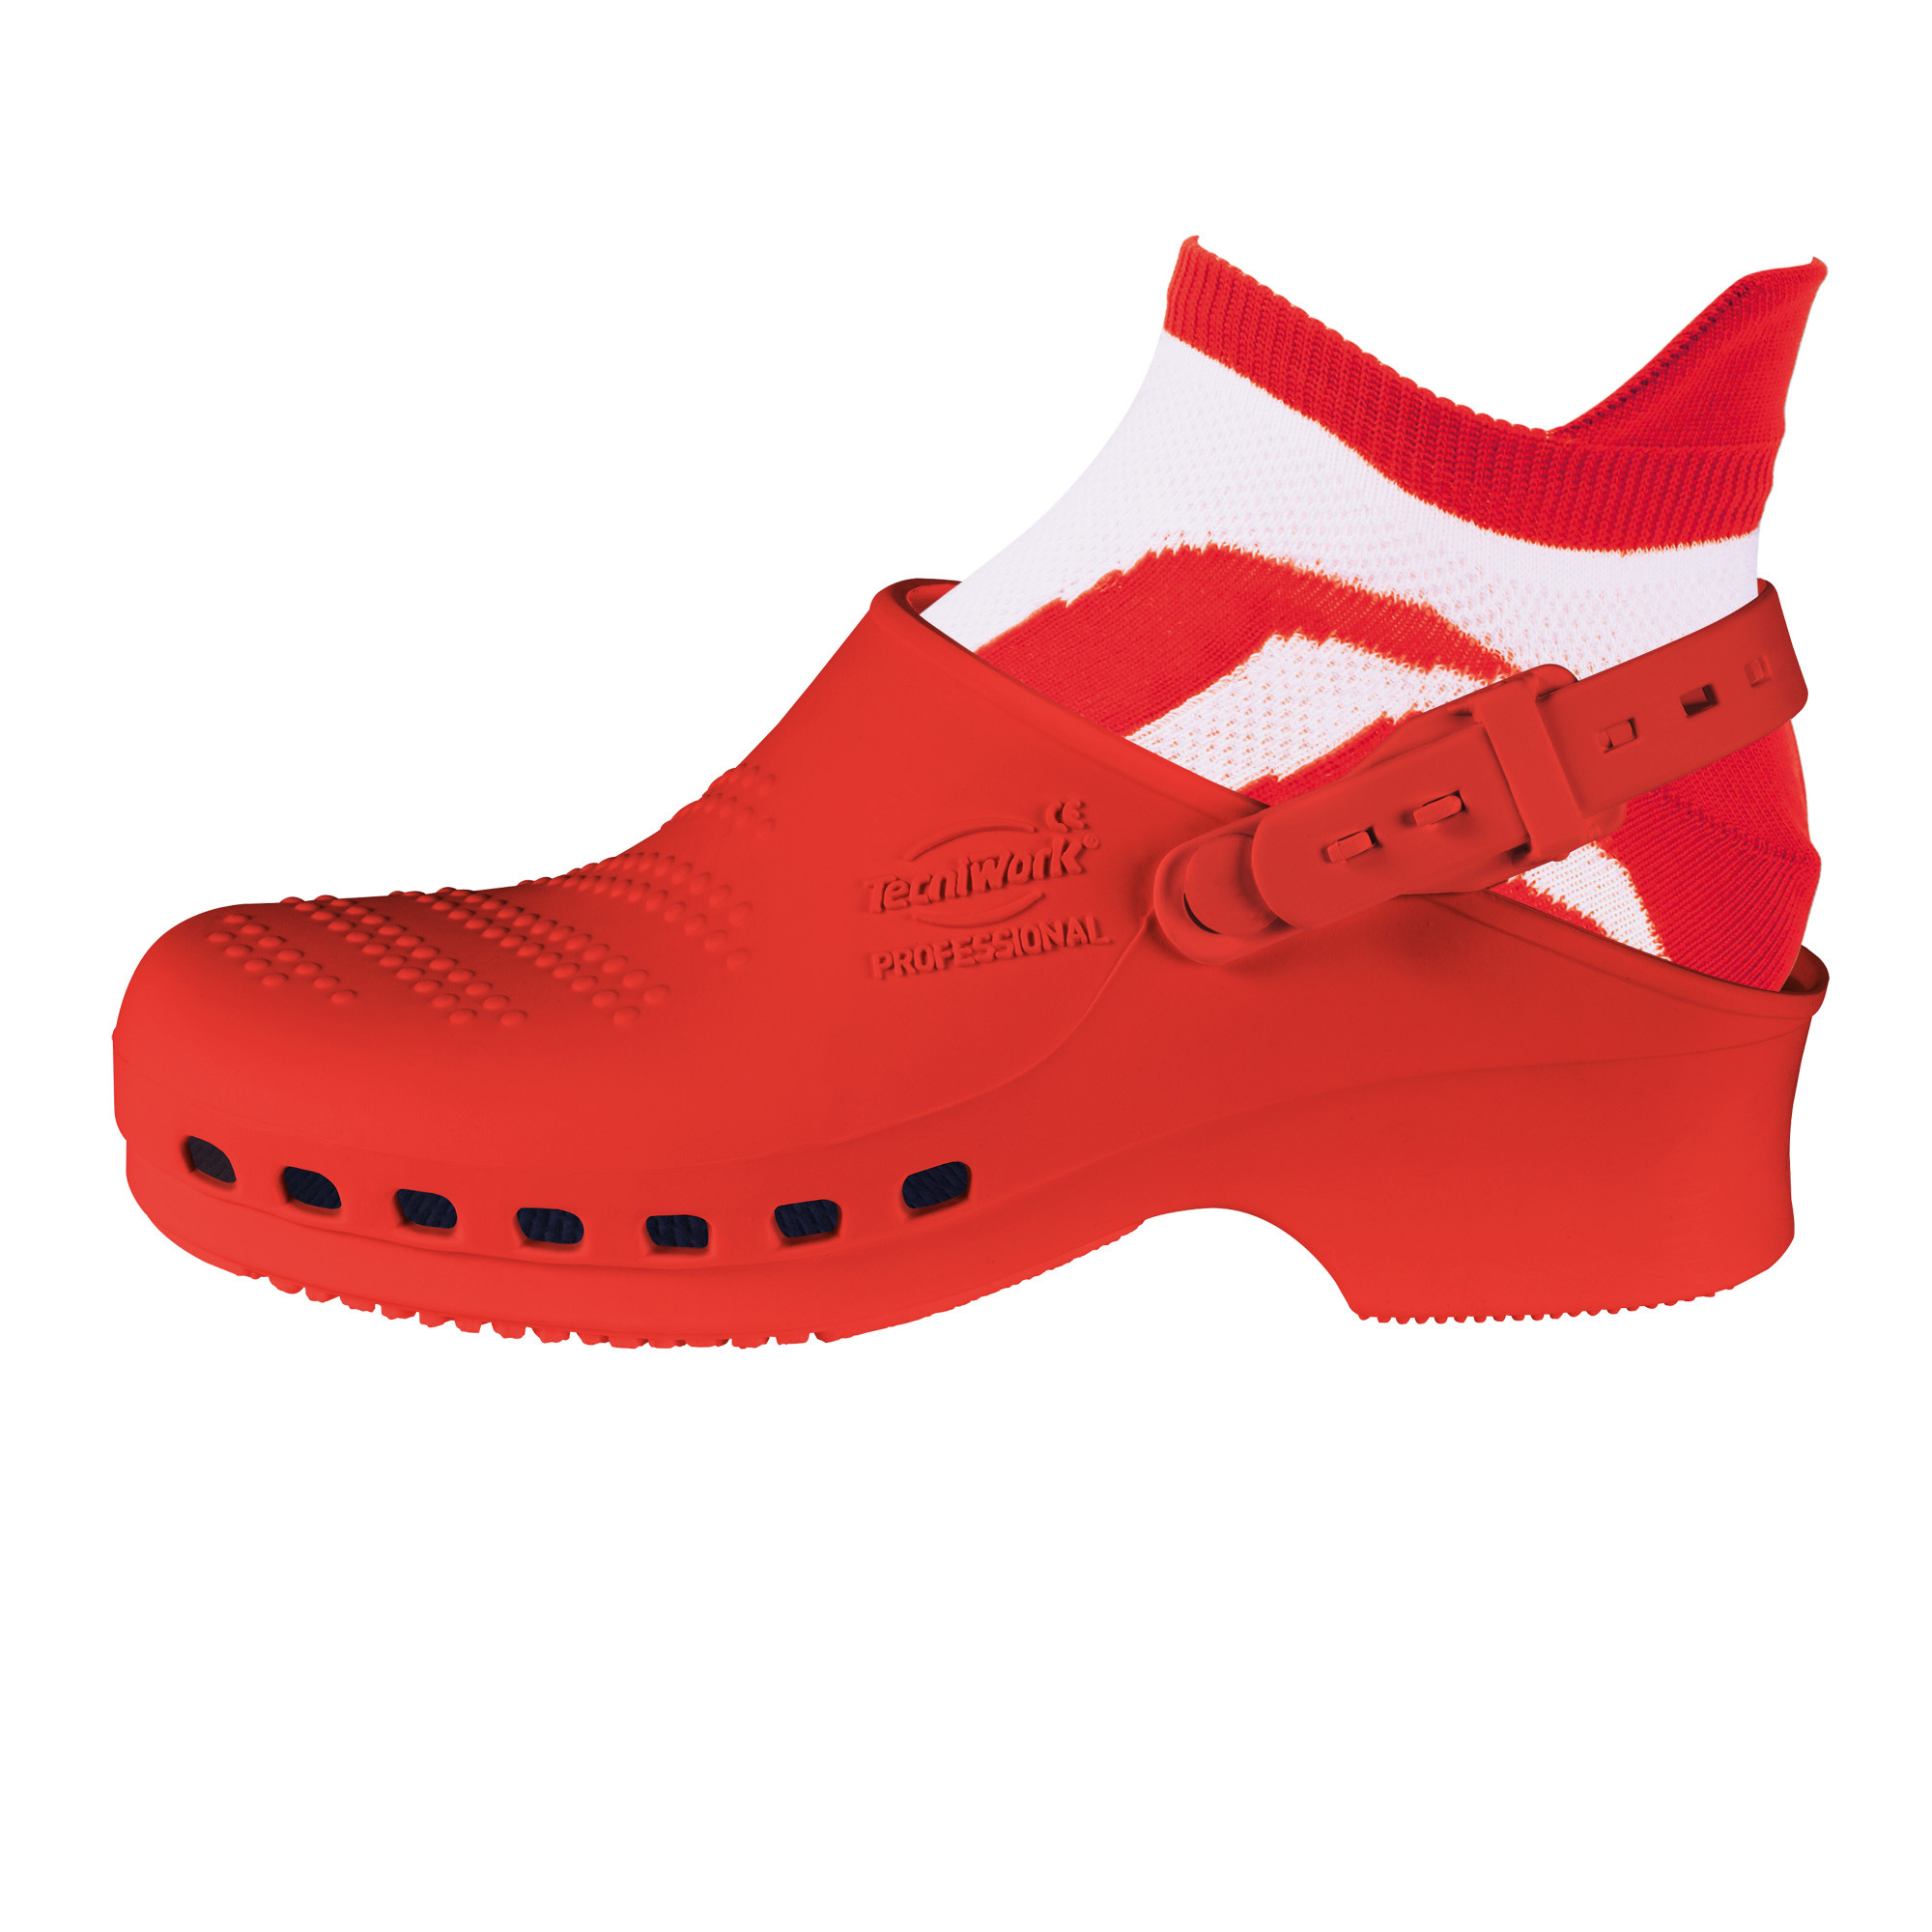 Professional sanitary clogs red Size 36/37